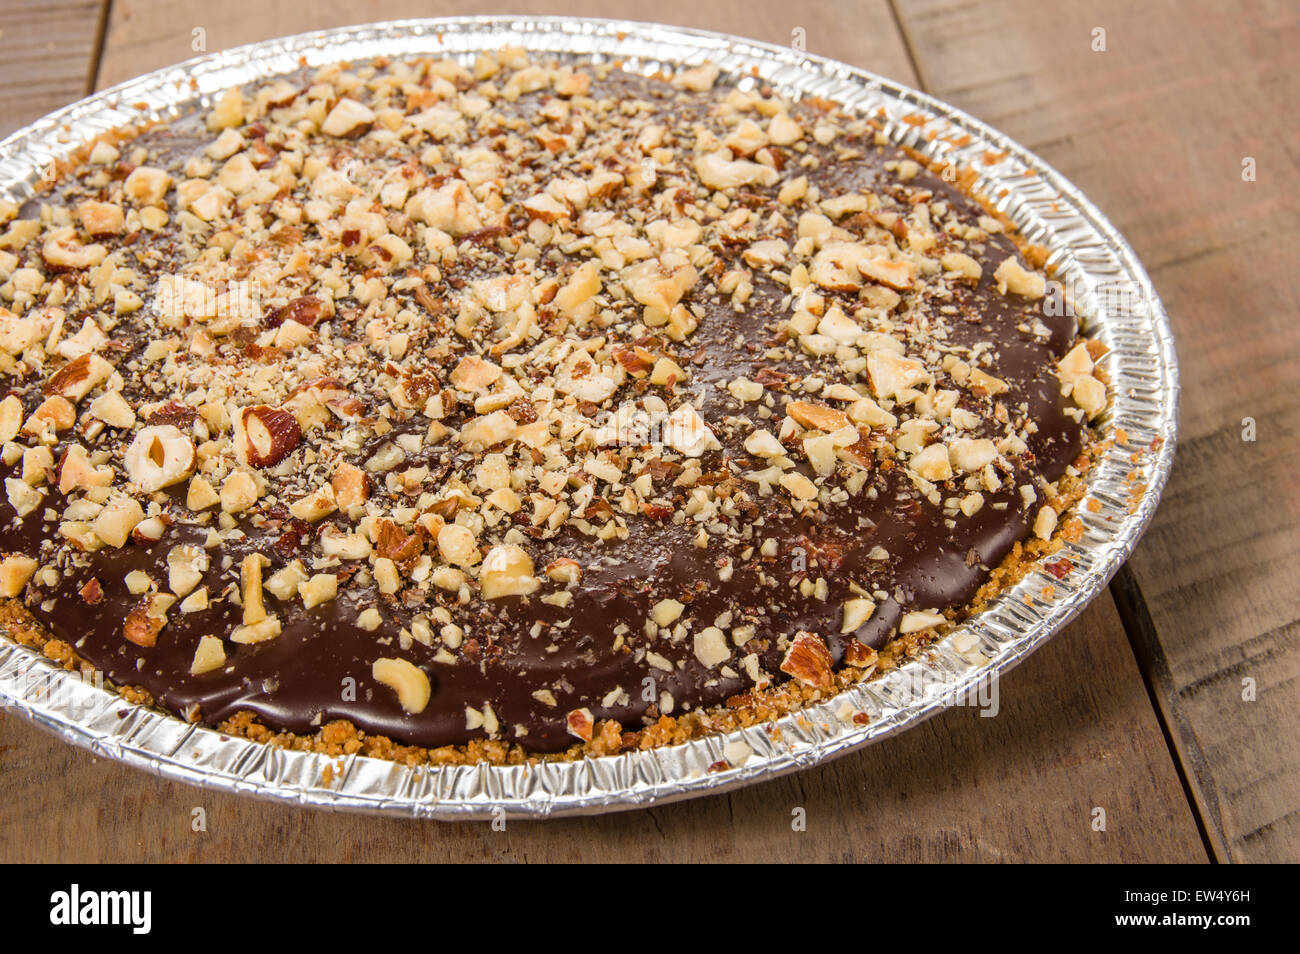 Chocolate pie with hazelnut frosted topping Stock Photo